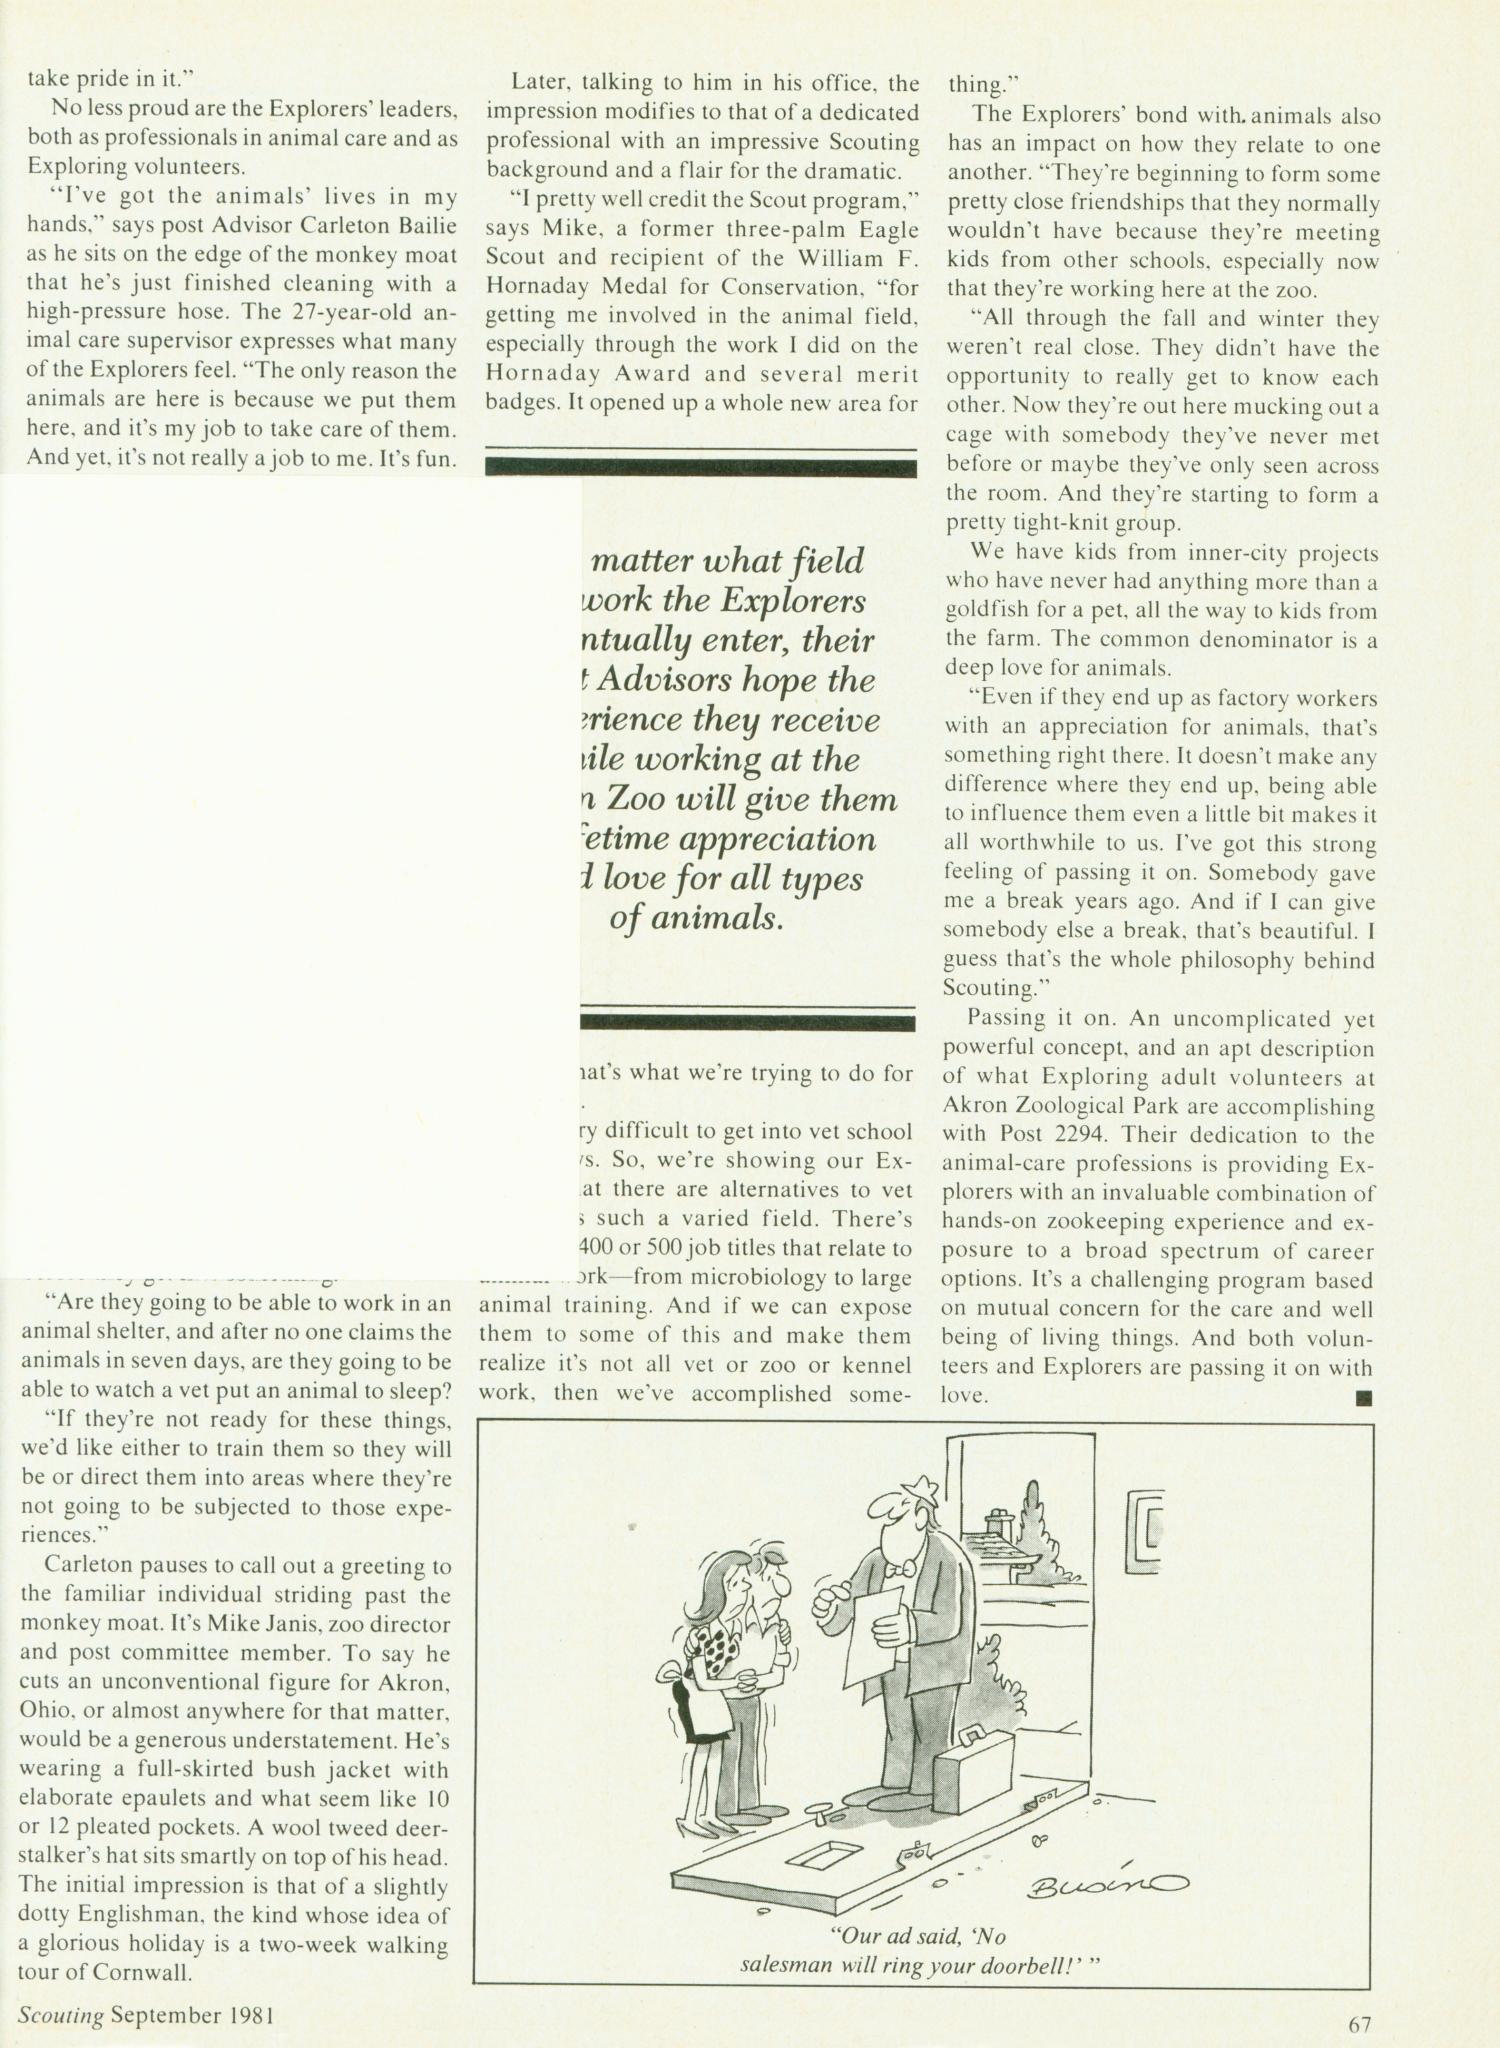 Scouting, Volume 69, Number 4, September 1981
                                                
                                                    None
                                                